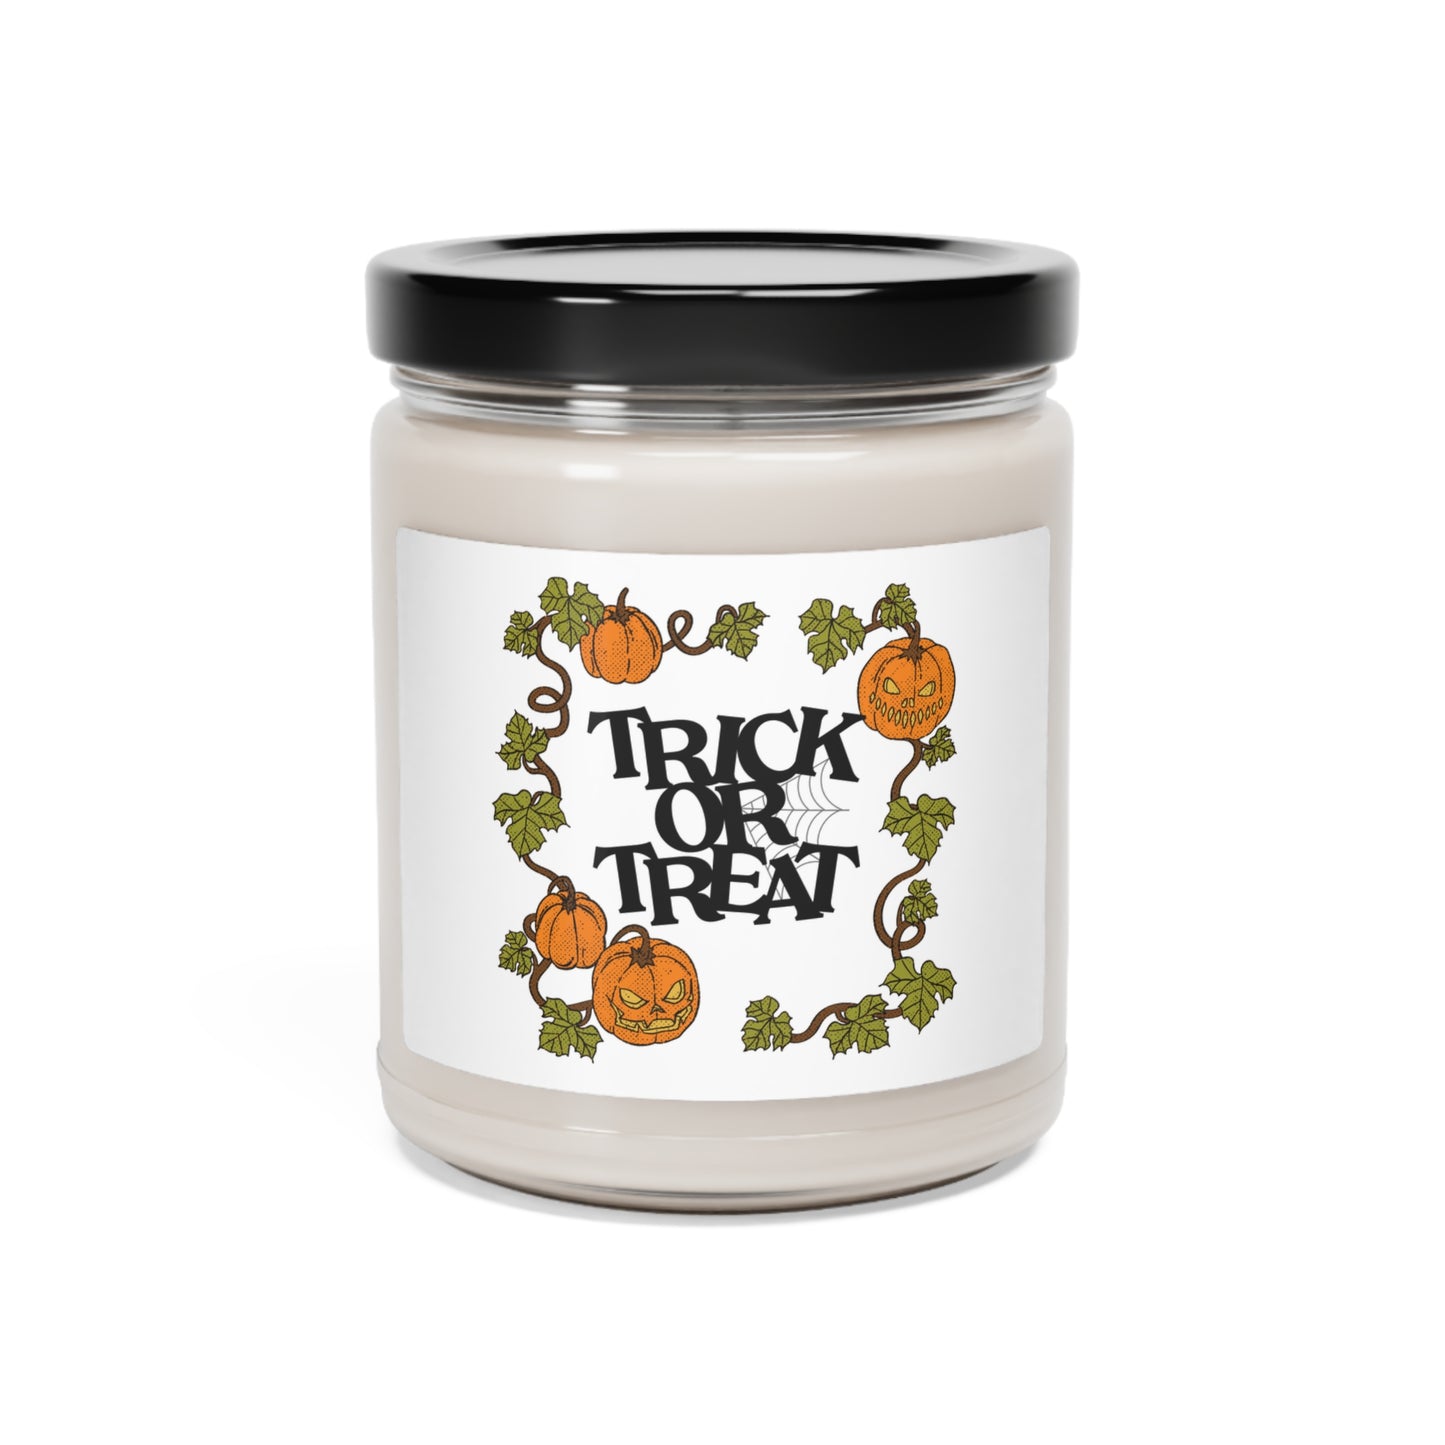 Trick or treat Halloween Scented Soy Candle, 9oz CHOOSE SCENT